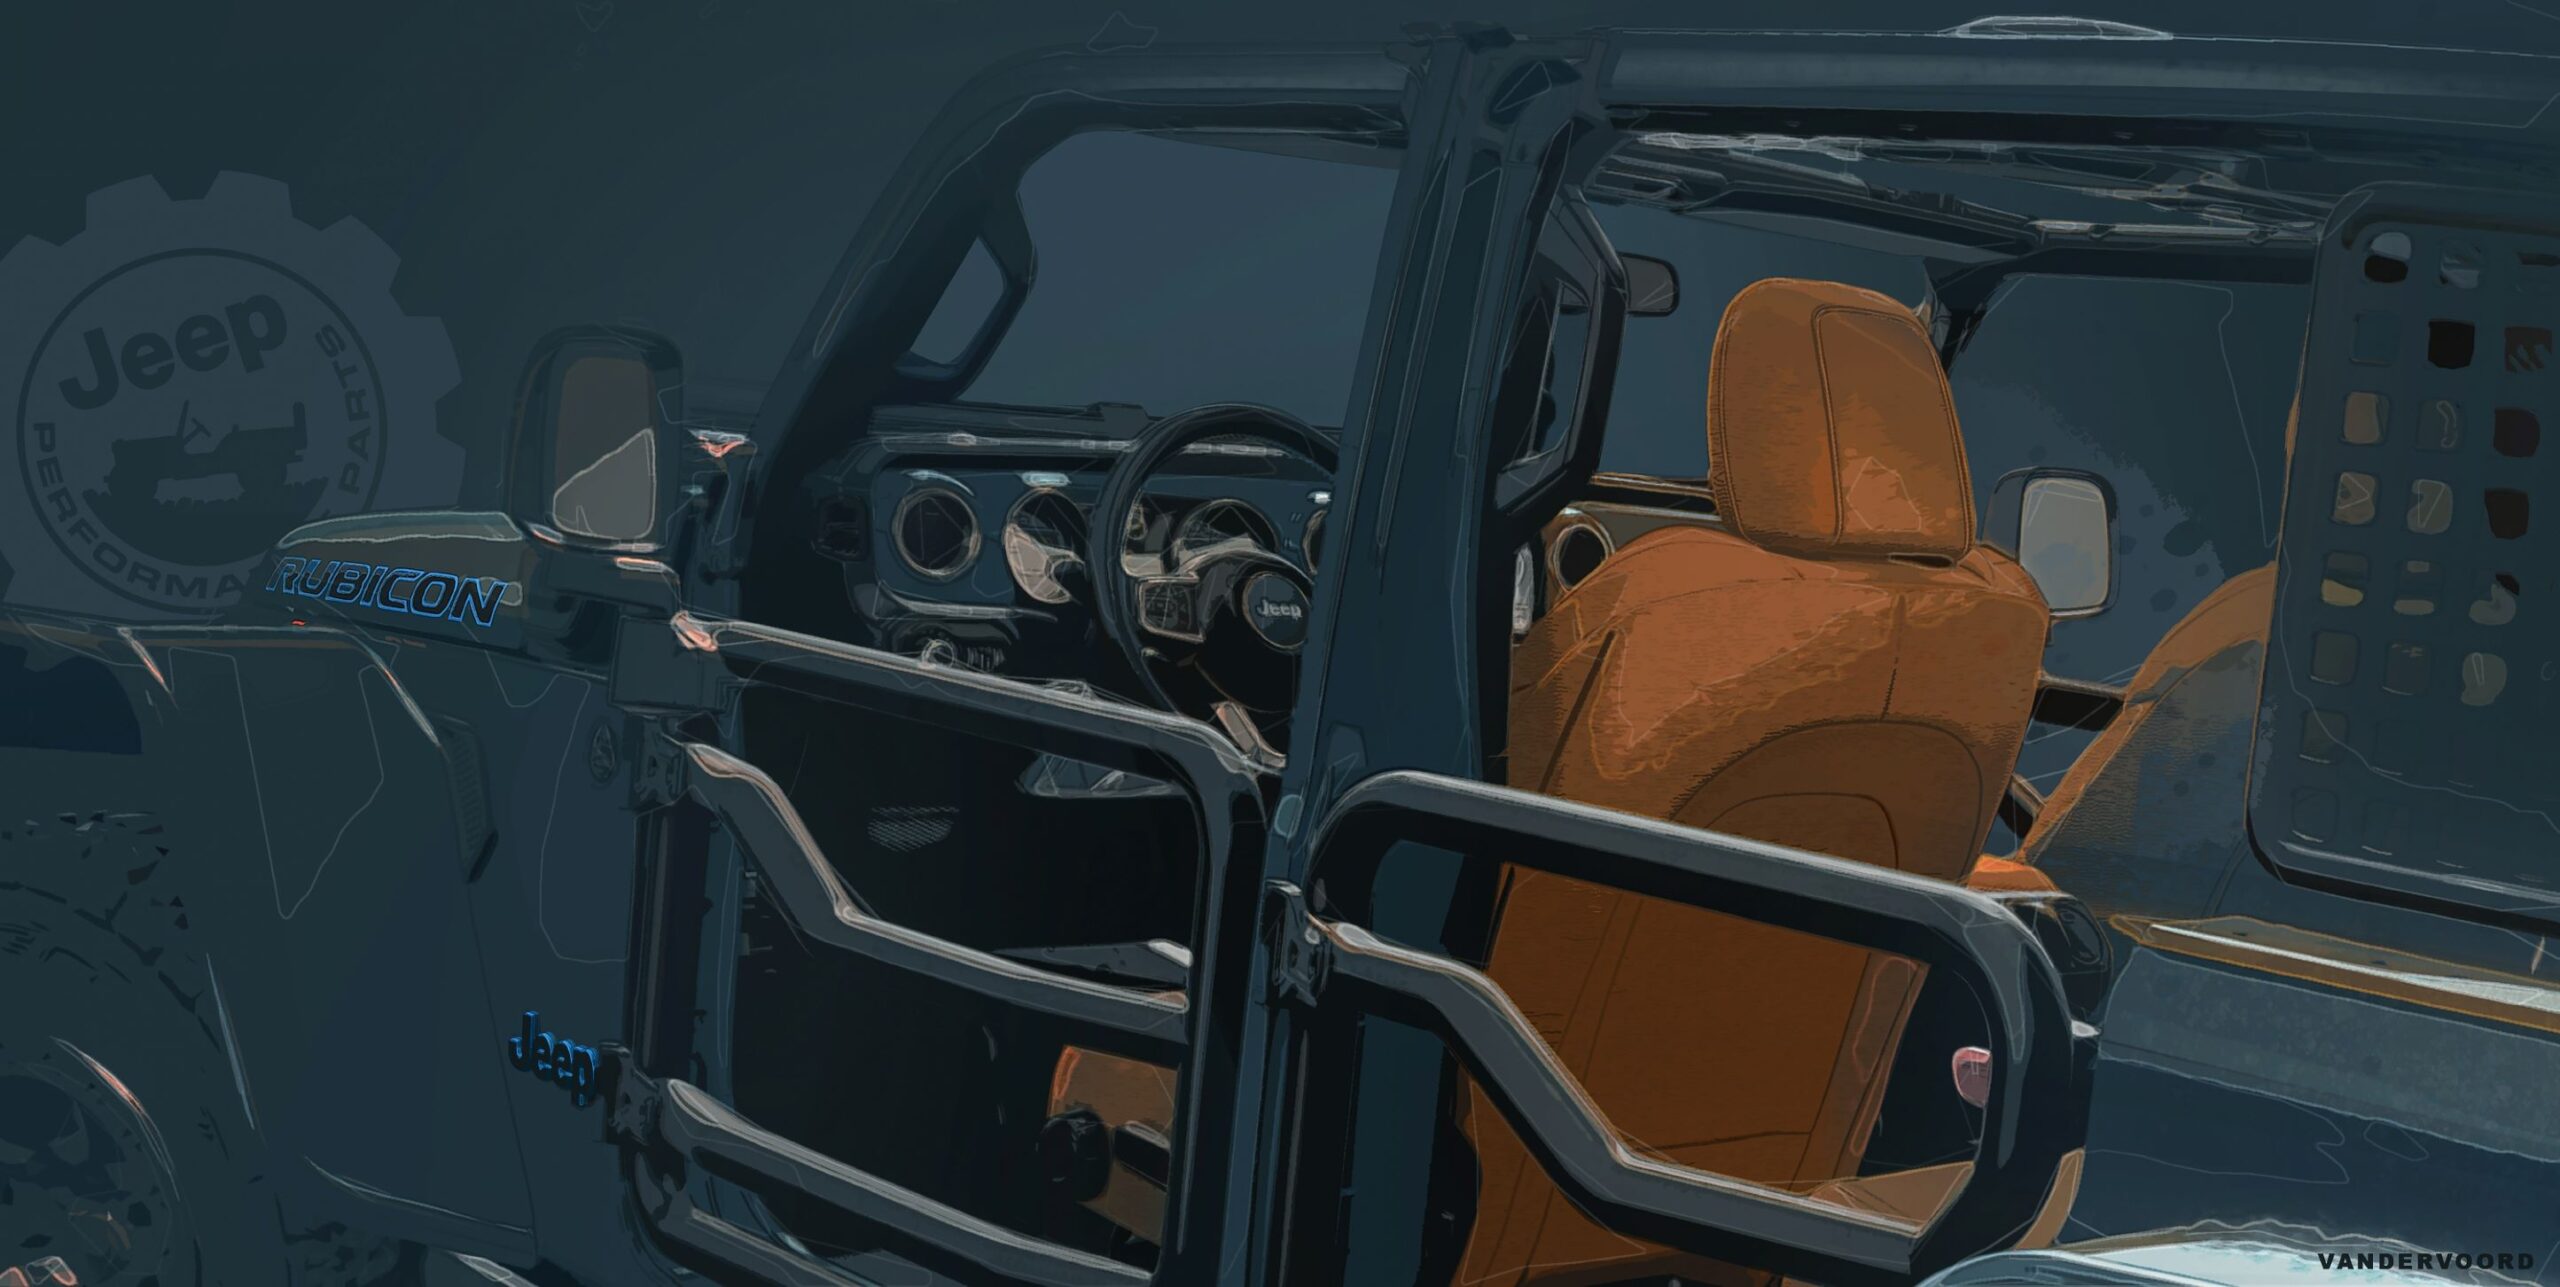 A teaser of a reworked Jeep previewed ahead of the Annual Easter Jeep Safari